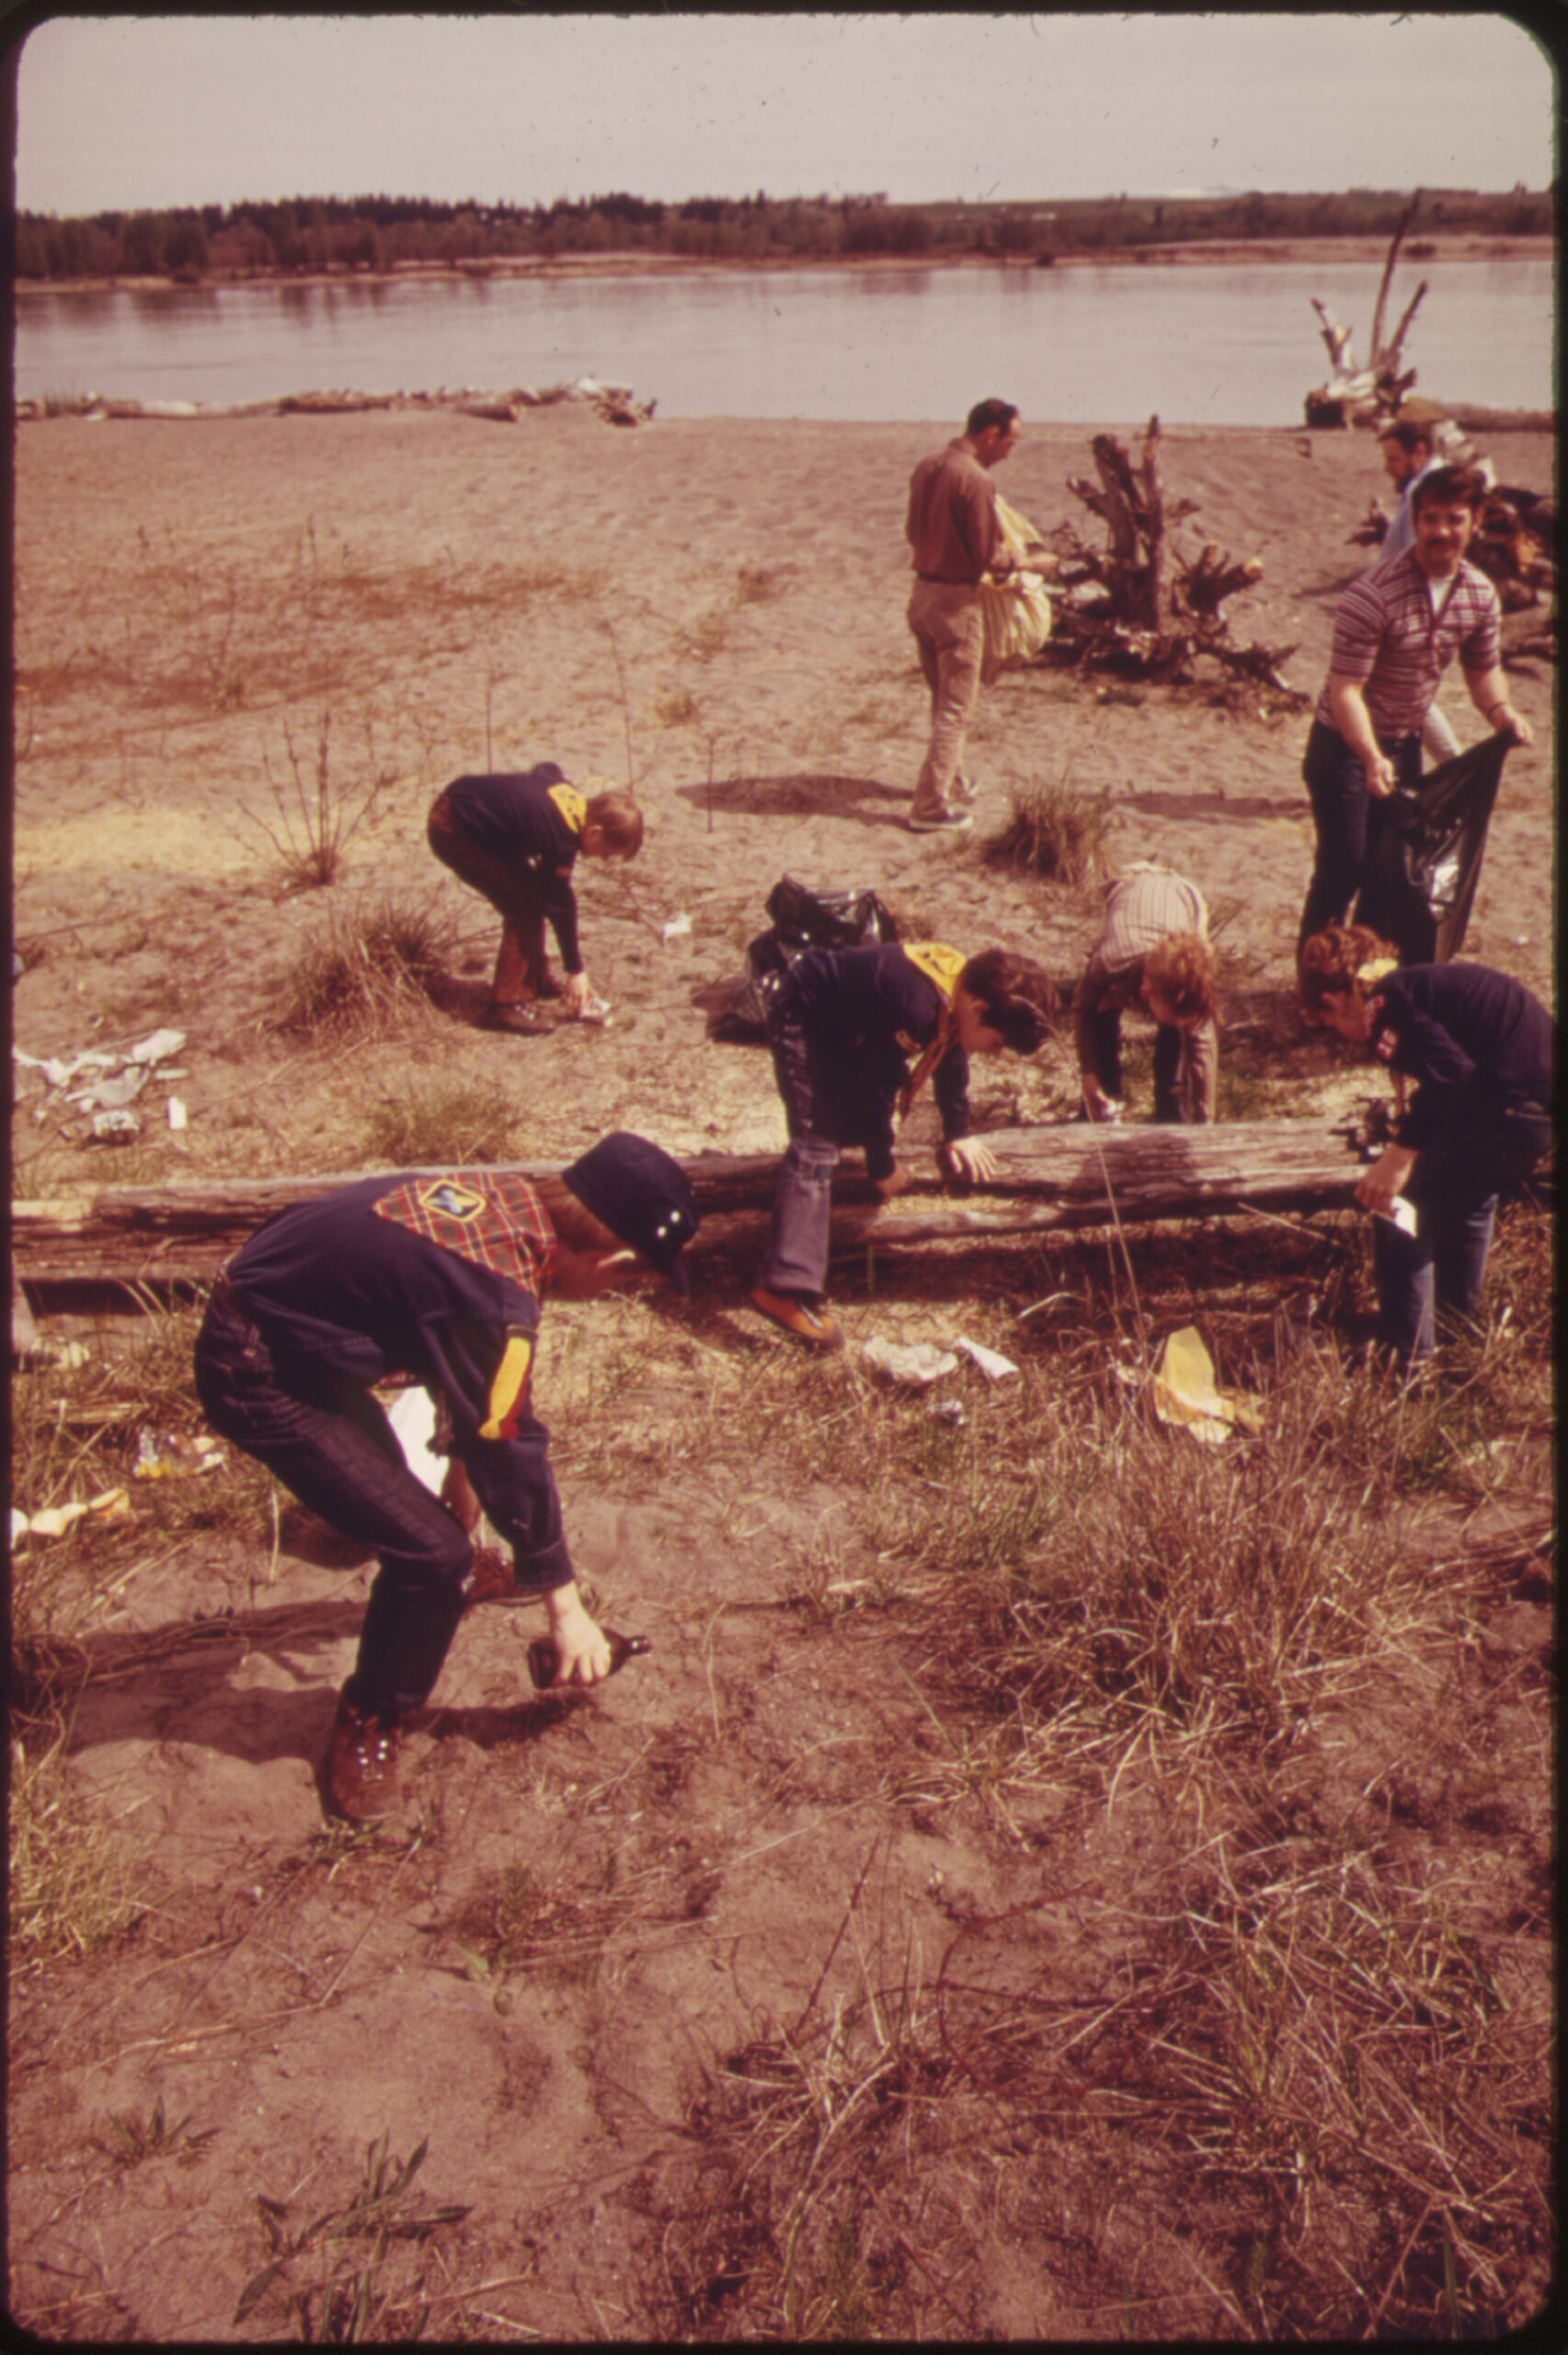 An archival photo shows a group of Boy Scouts picking up litter near a lake.